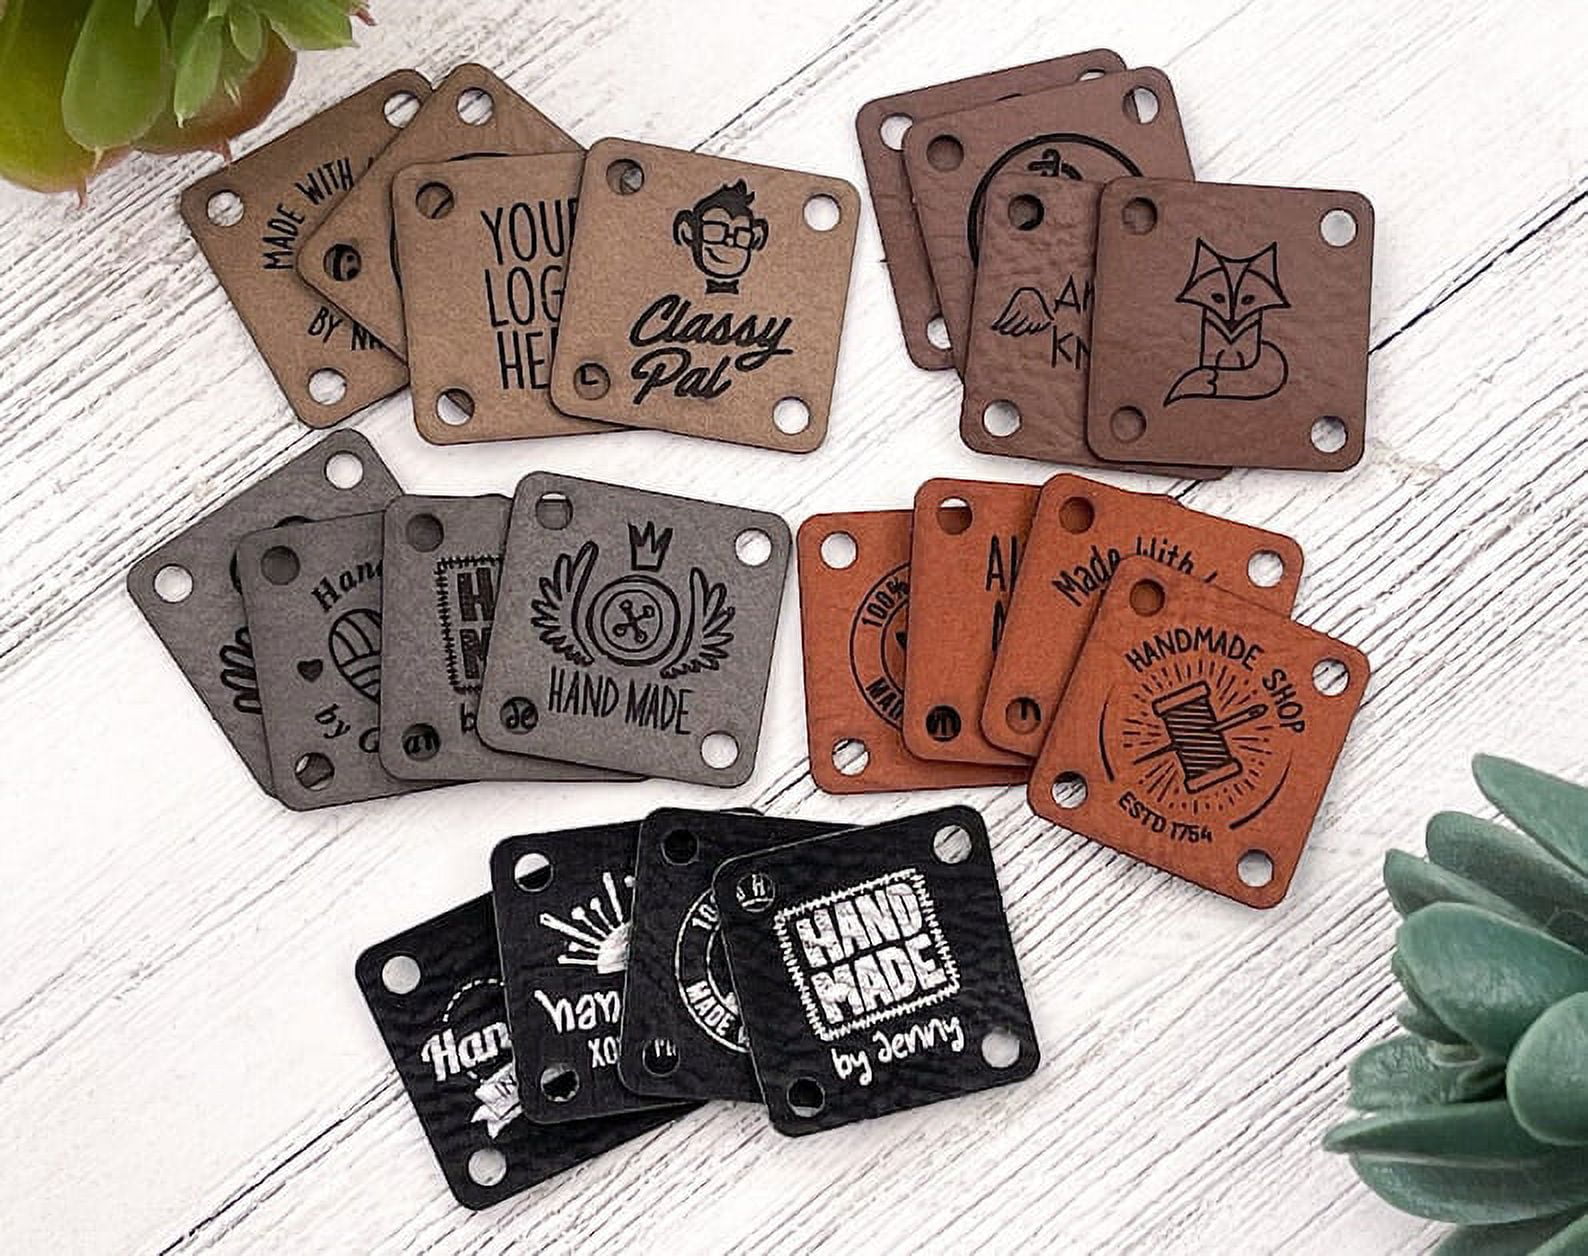 Handmade Tags Square Heart Leather Labels Hand Made Tags for Hats Knitted Tags  for Handmade Sewing Accessories Gift Decor 20pcs